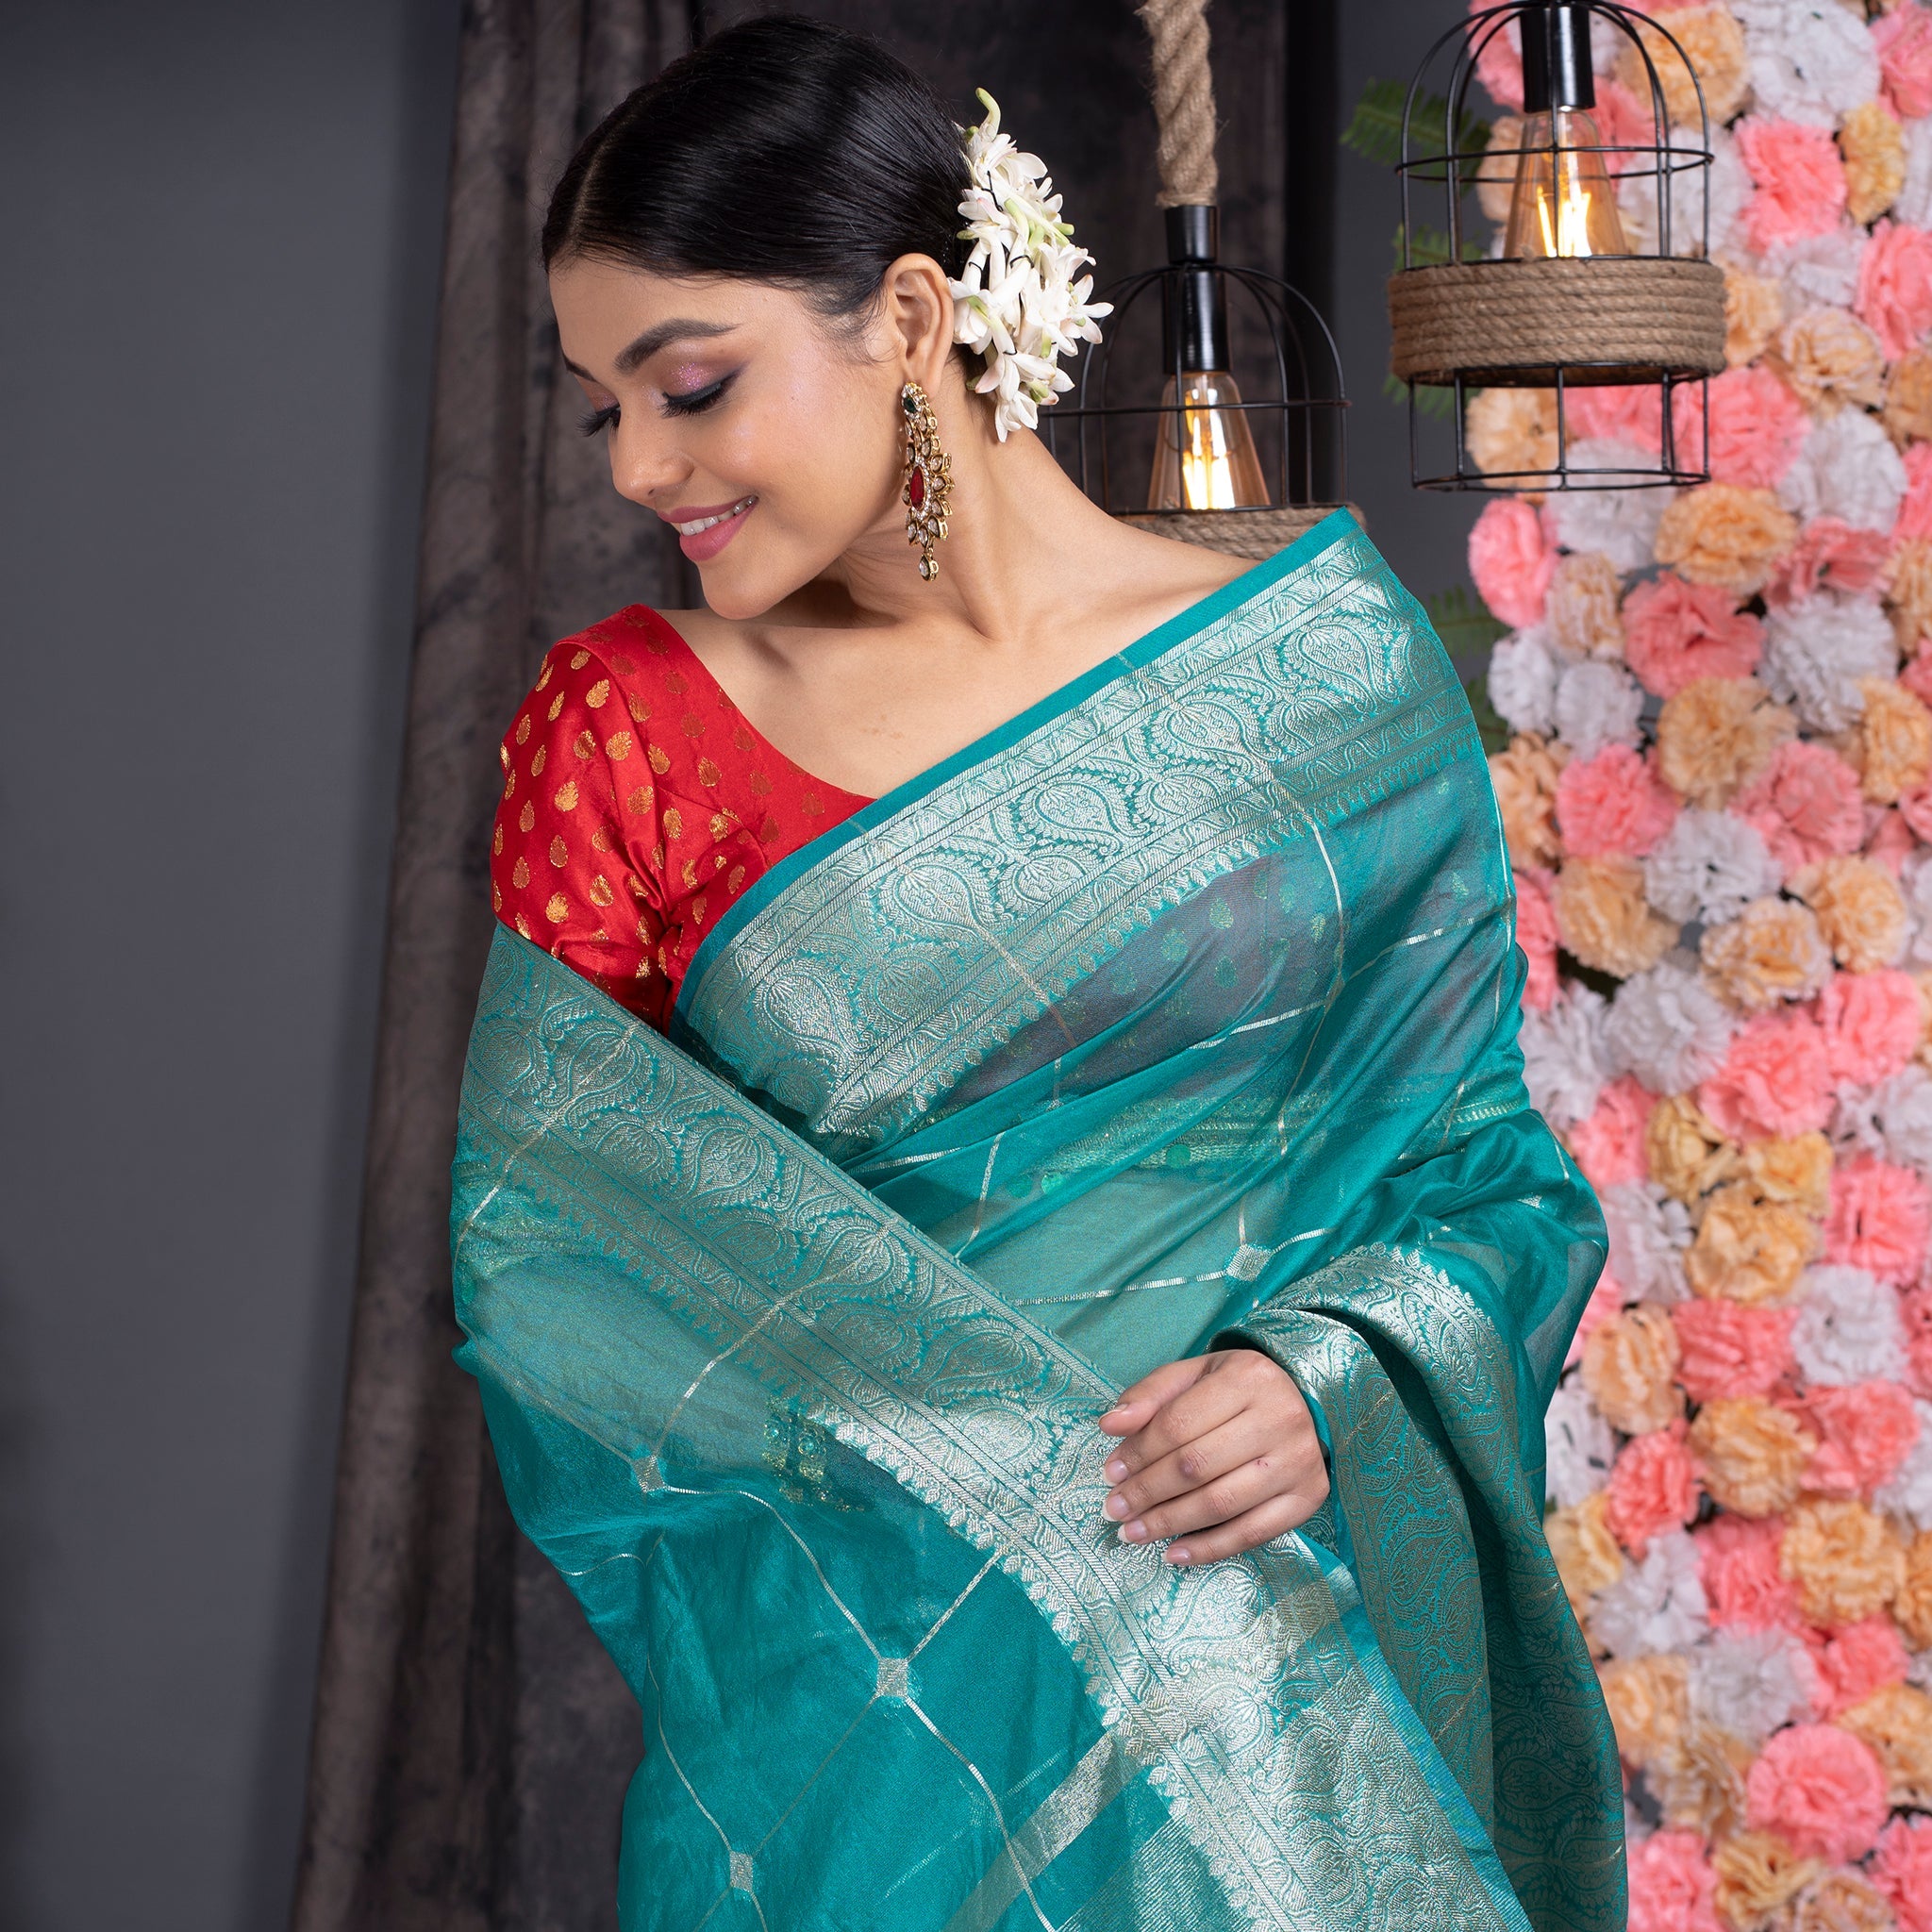 Women's Teal Organza Saree With Square Motifs And Ambi Jaal Border - Boveee